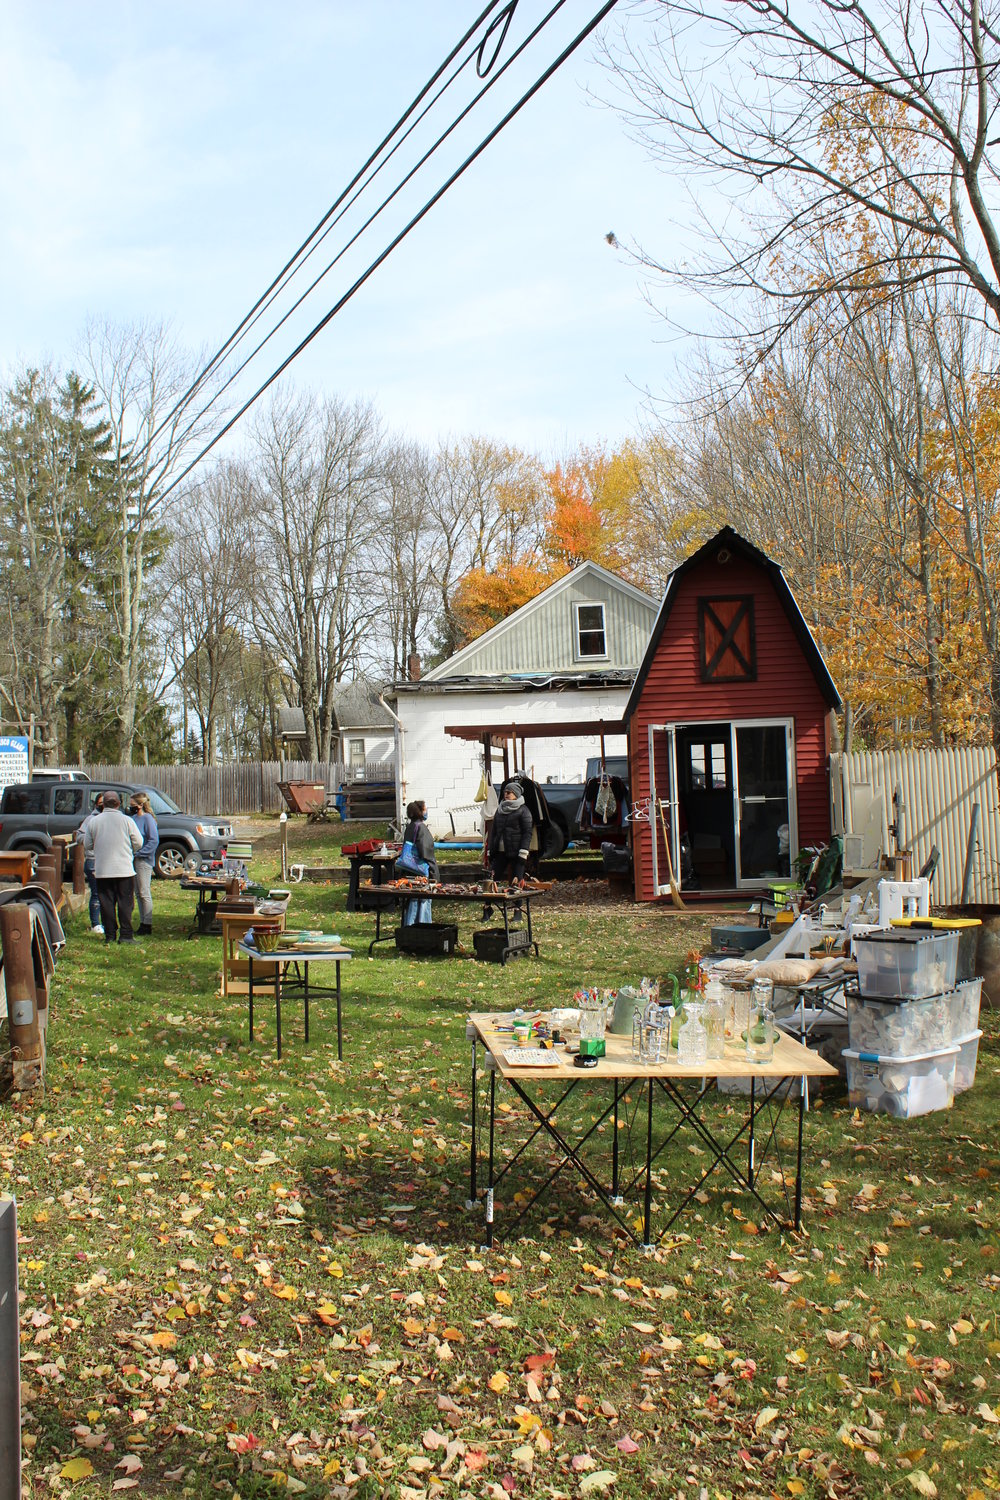 A recent Sunday at Route 652 Roadside Finds. The pop-up shop in Beach Lake, PA sells items from tools to vintage clothing—including coats!